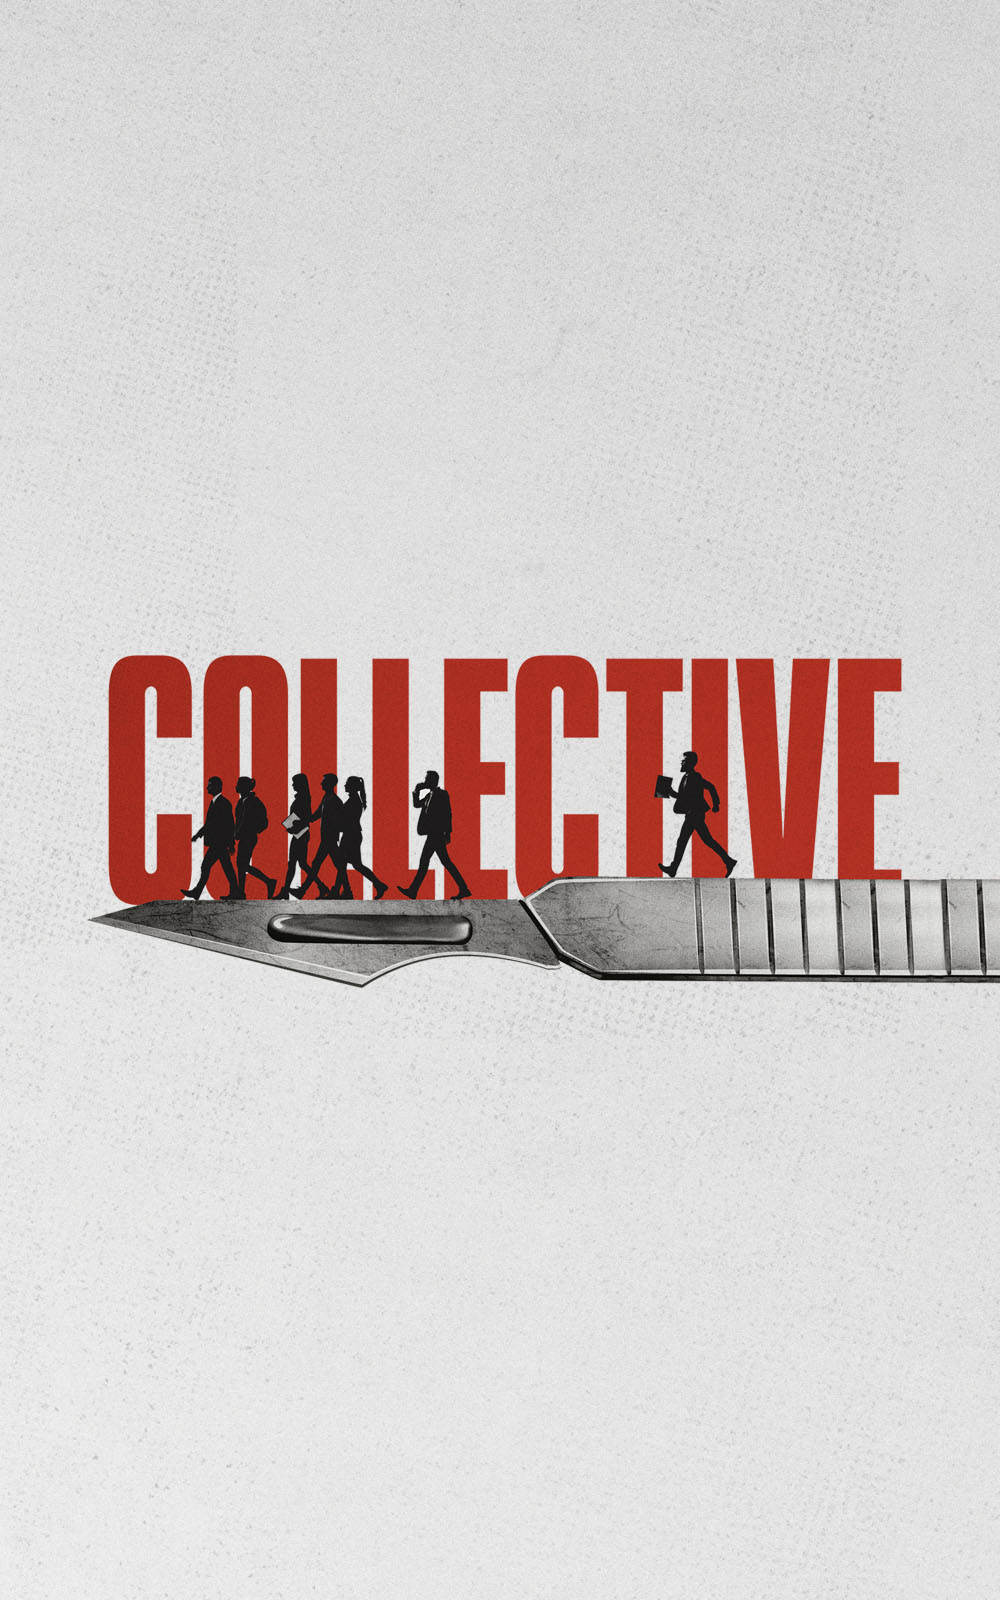 Collective - Poster